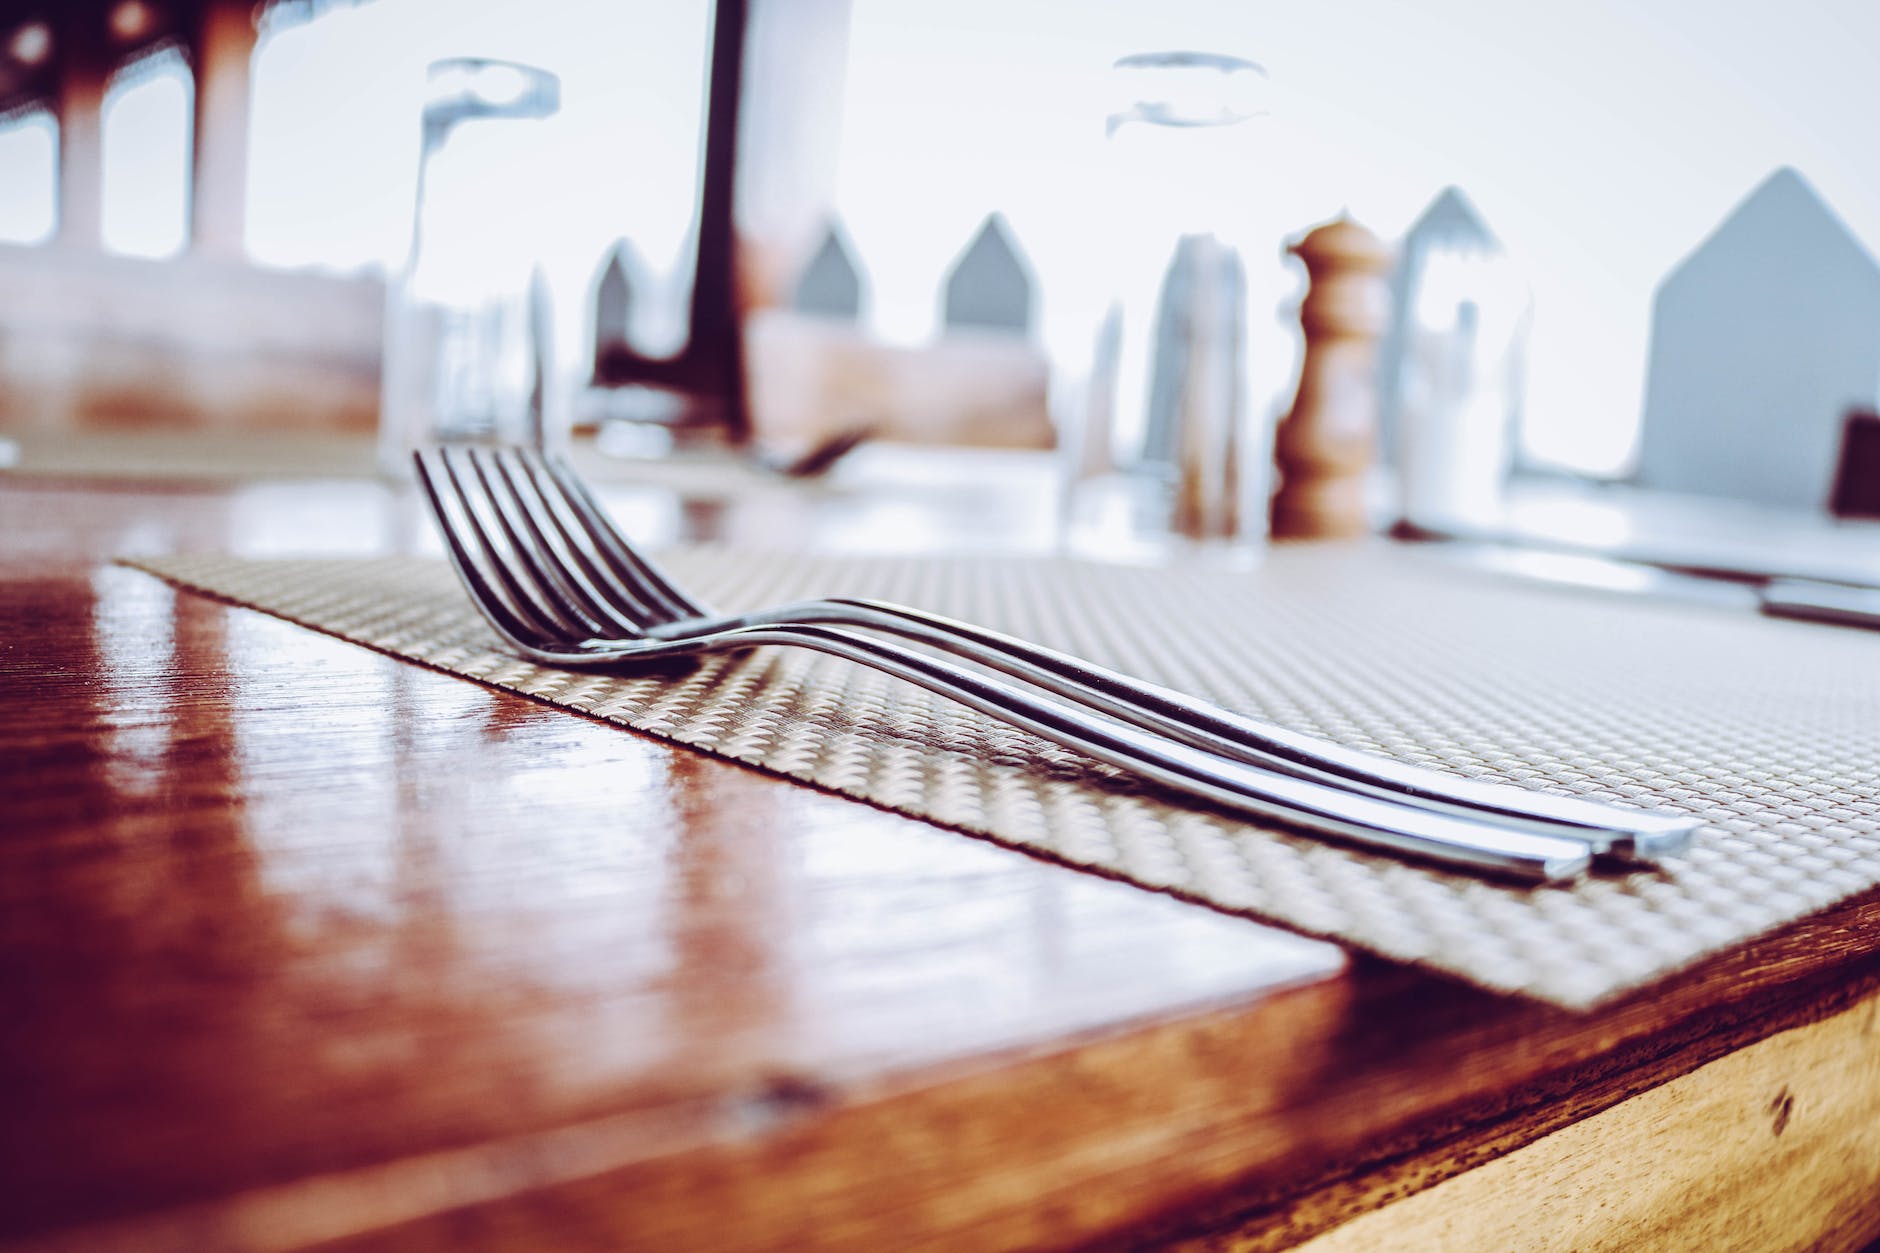 two stainless steel forks on top of place mat